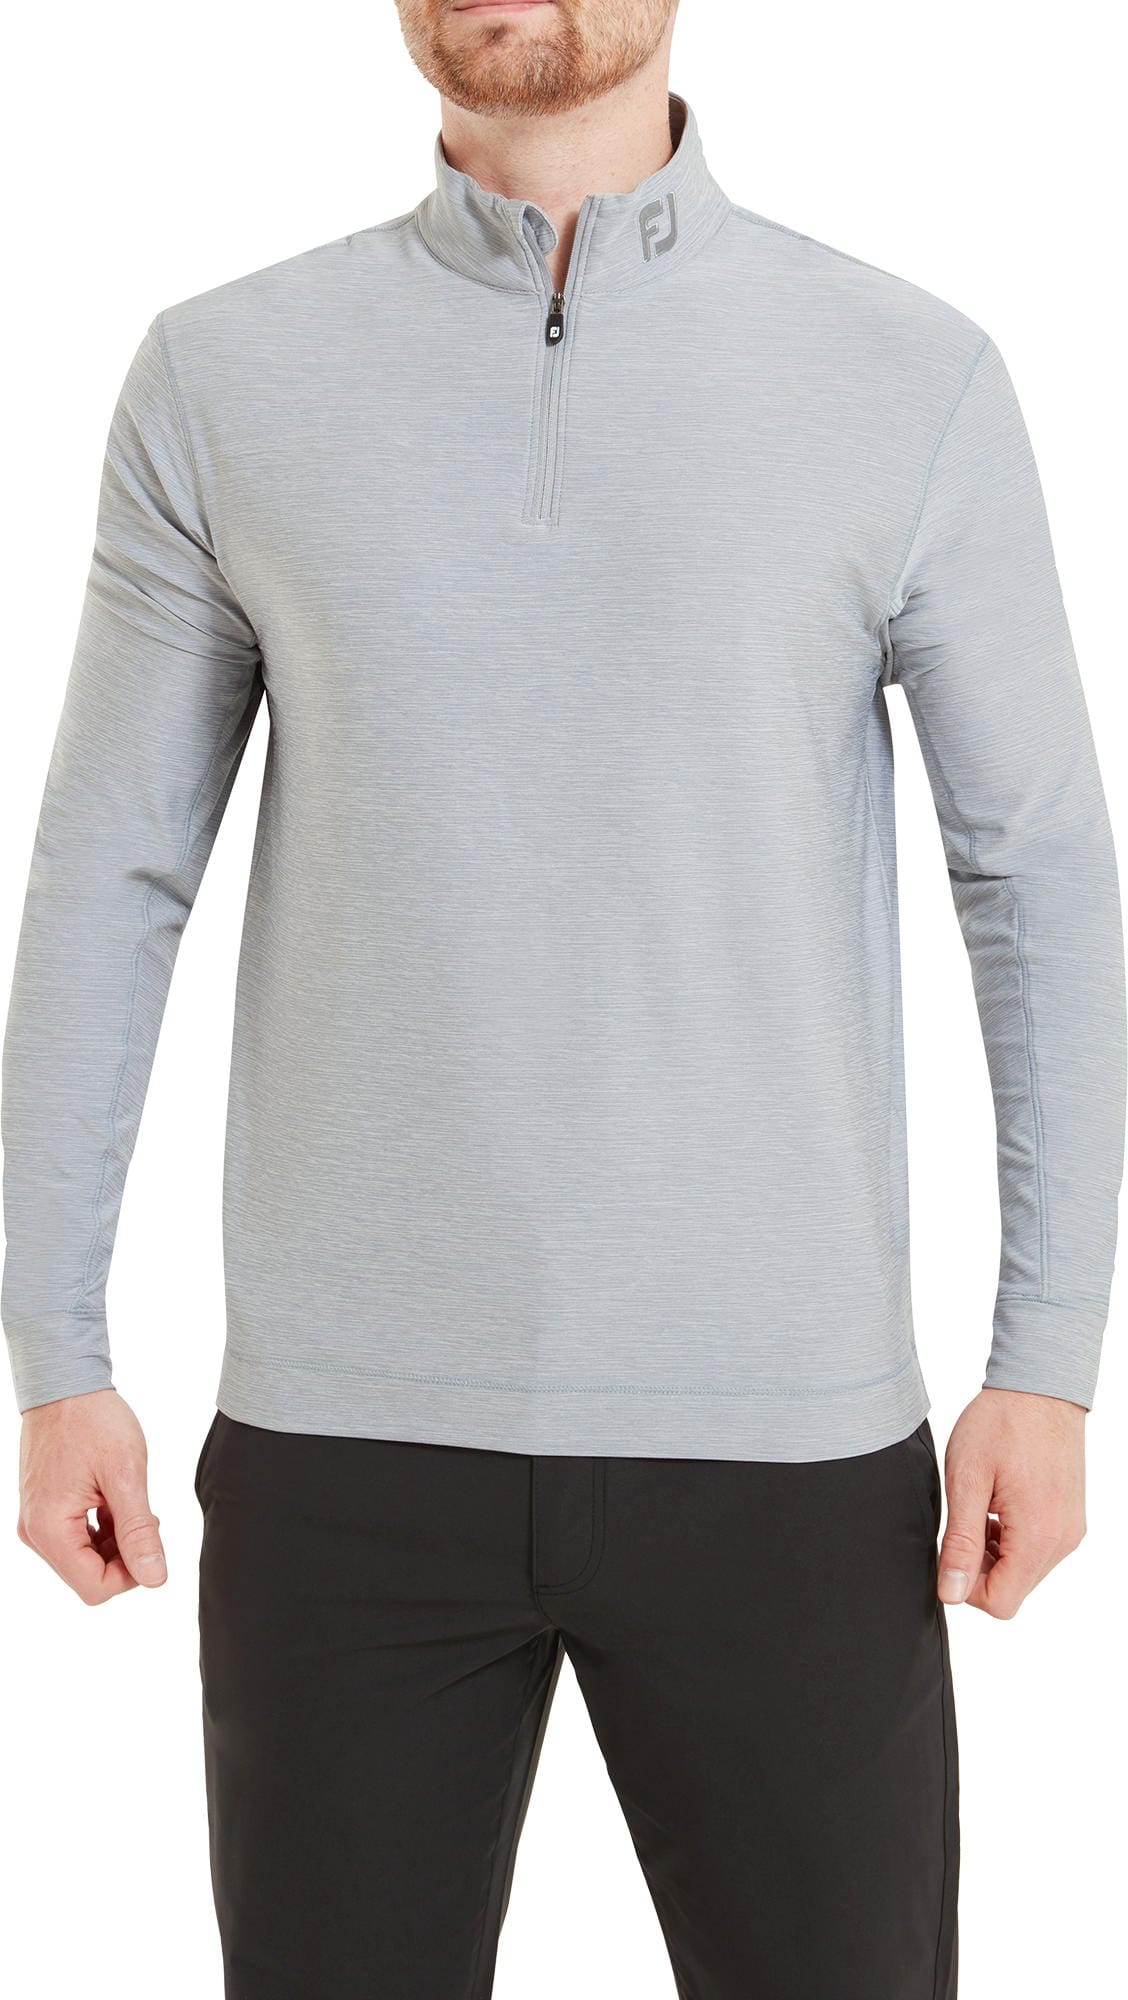 FootJoy Space Dye Chill-Out Midlayer